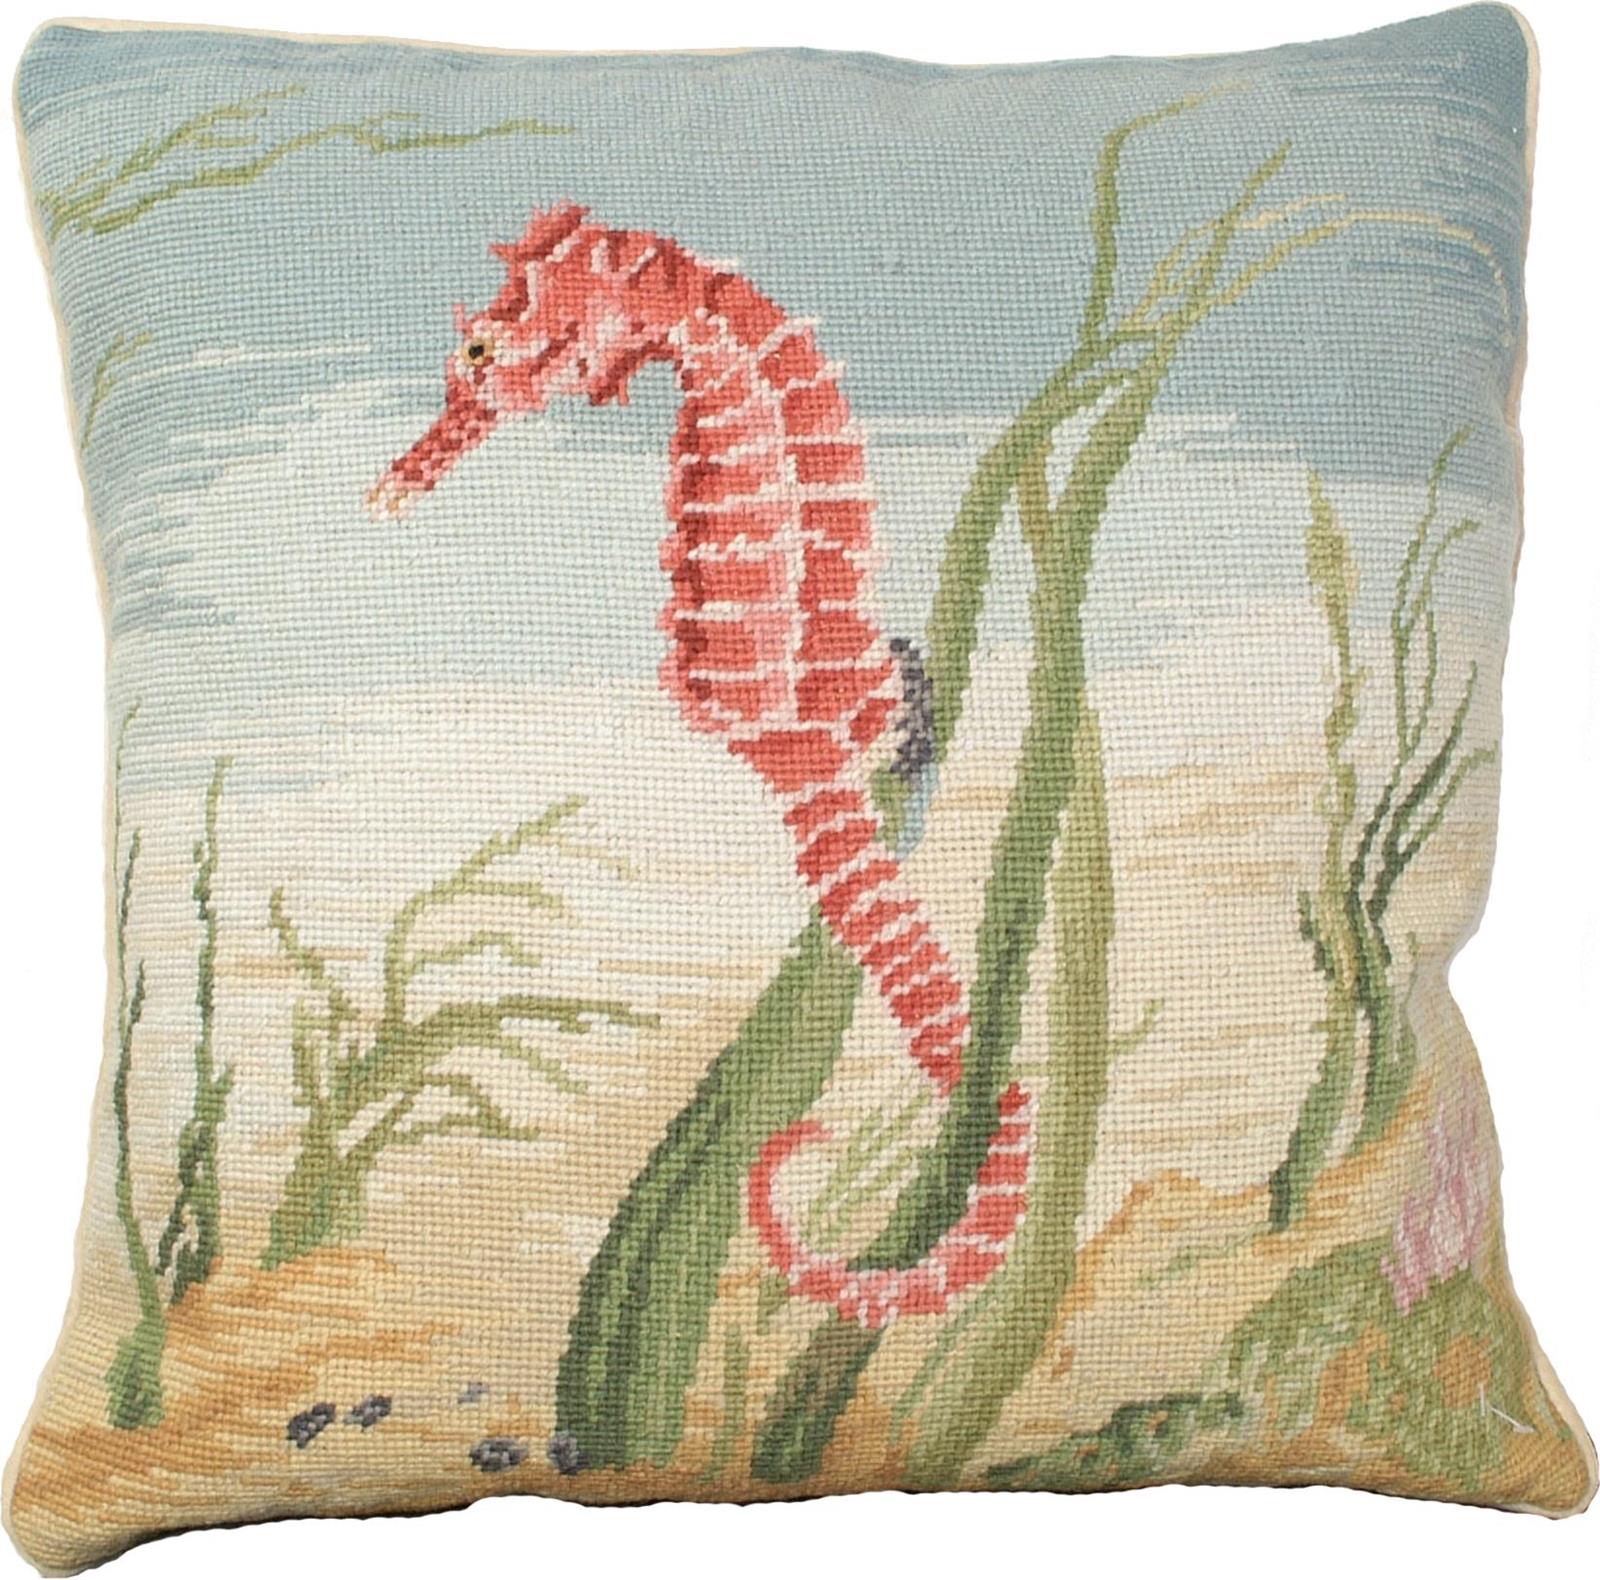 Pillow Throw Sea Horse 18x18 Coral Pink Down Insert Cotton Velvet Back Wool-Image 1